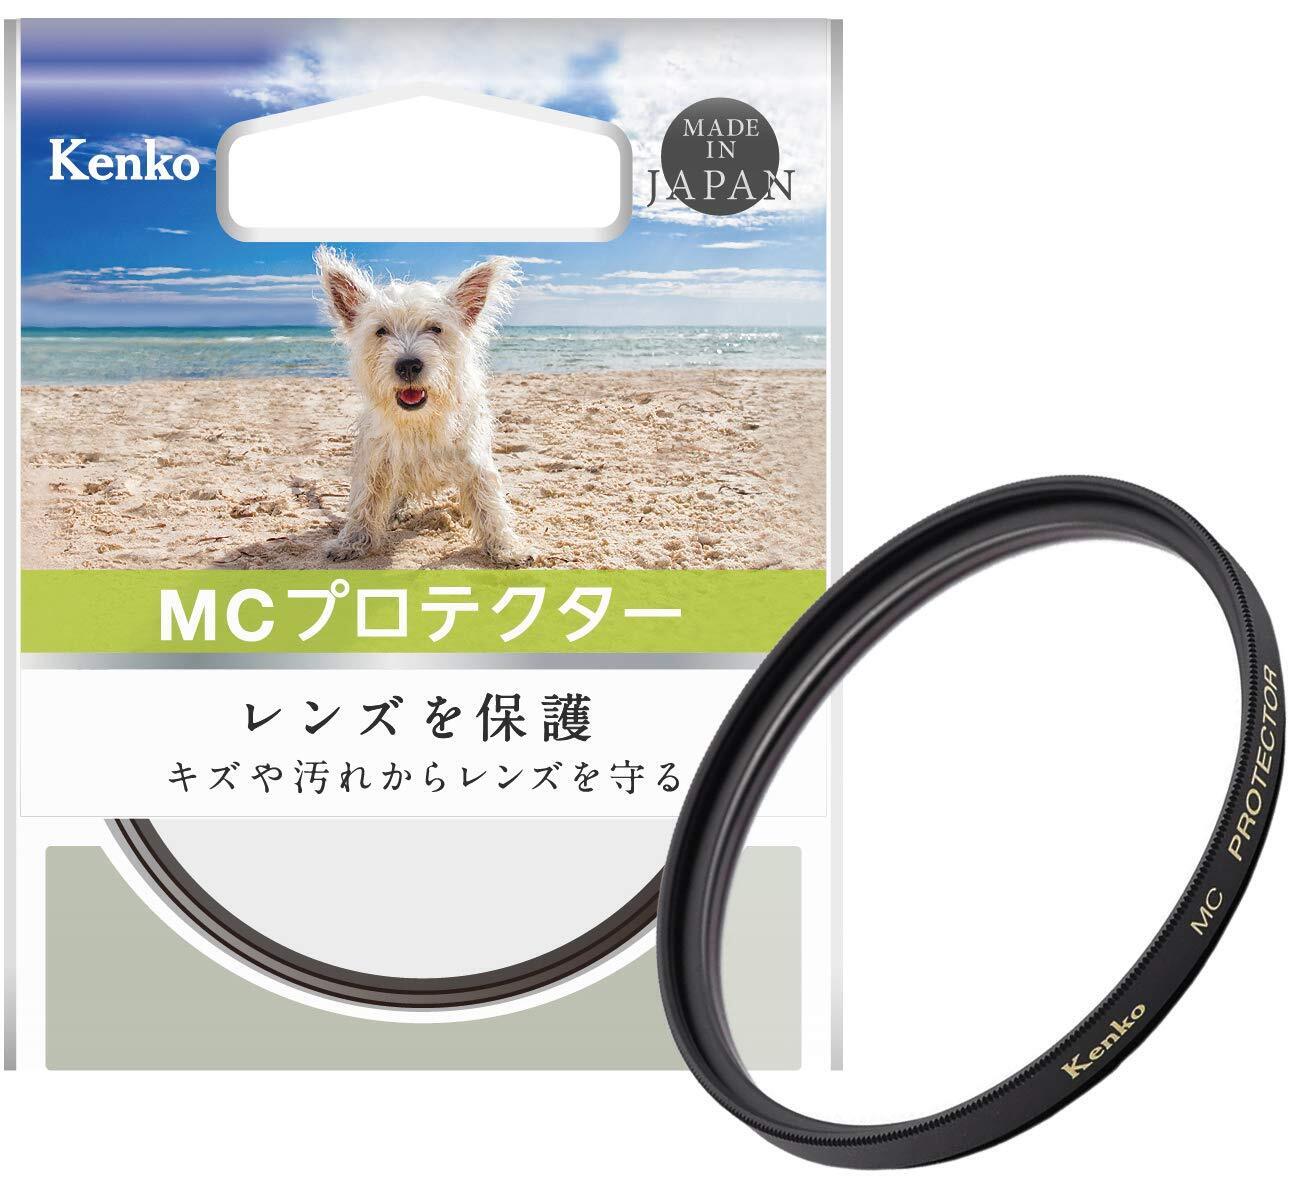 Kenko Lens Filter MC Protector 46mm Lens Protection Cleat Filter Case 146217